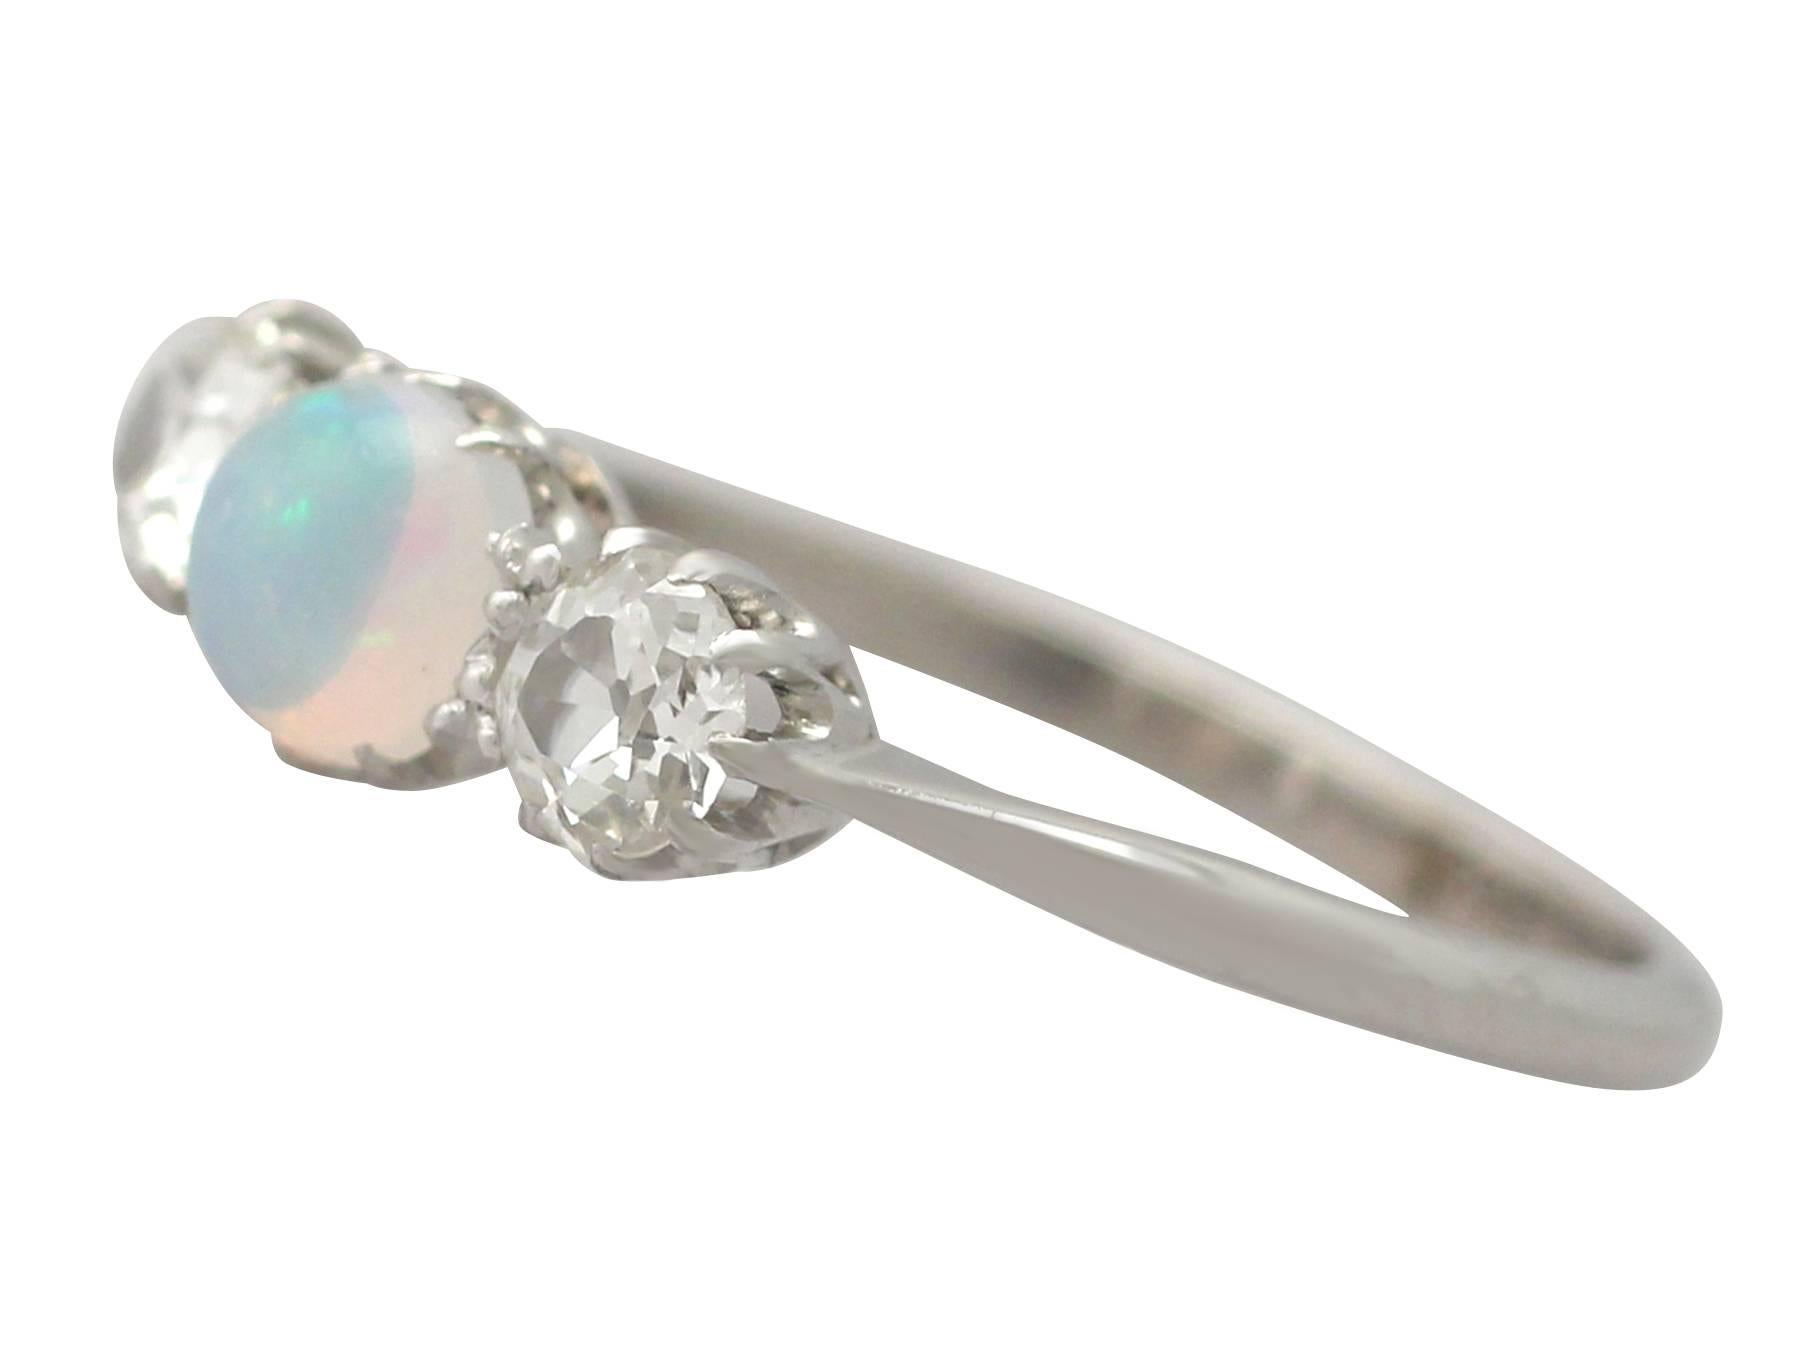 opal and diamond trilogy ring